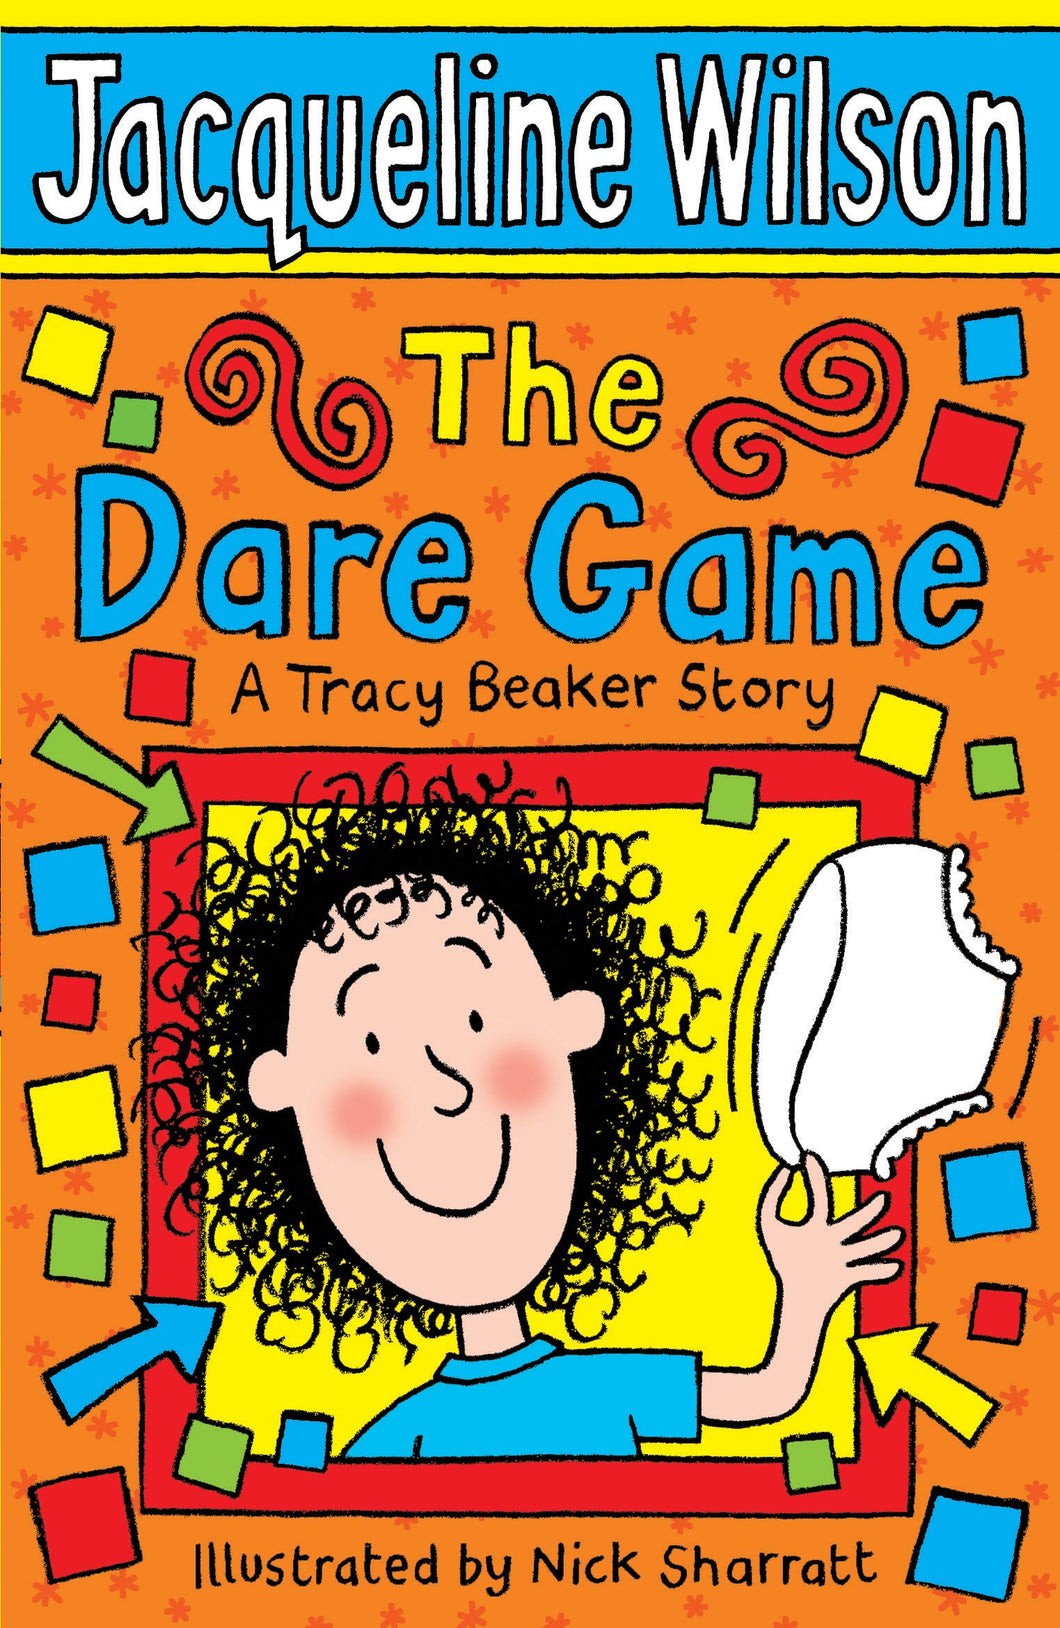 Jacquerline Wilsons's The Dare Game